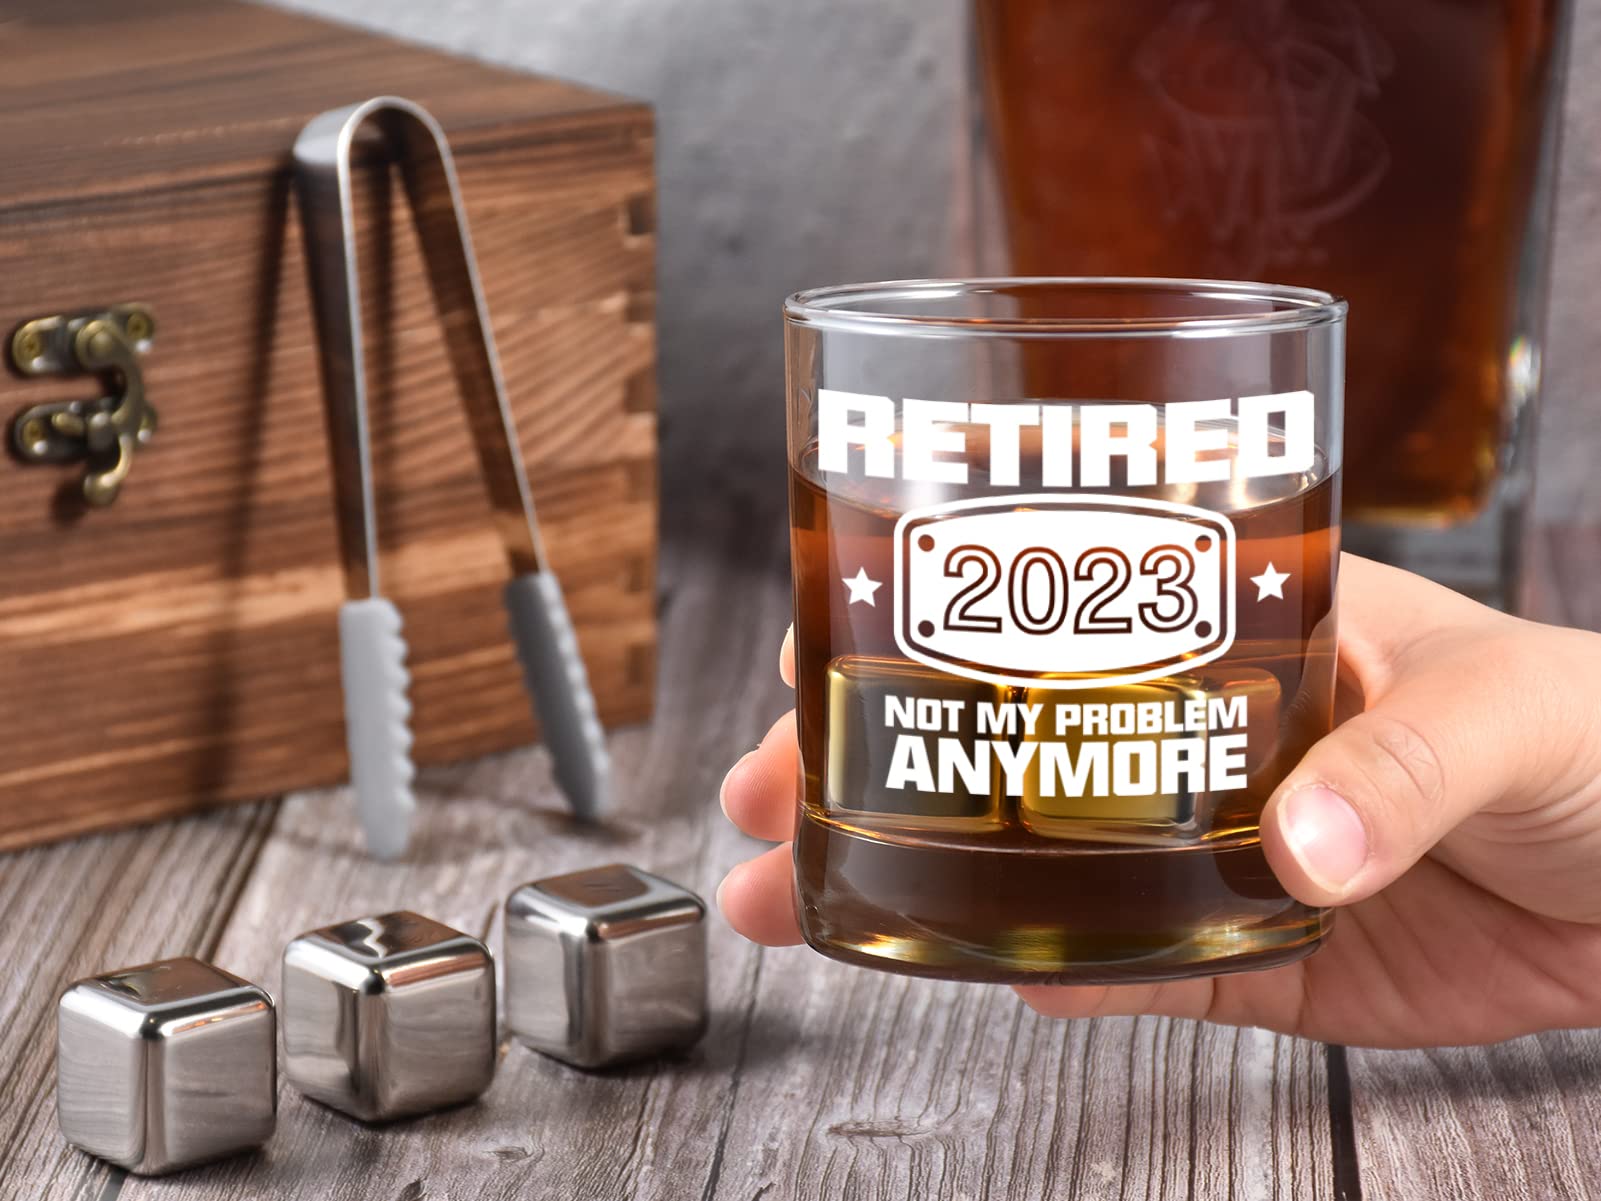 2023 Retirement Gifts for Men, Funny Retired 2023 Not My Problem Any More Whiskey Glass Wooden Gift Boxed Set, Happy Retirement Gifts for Boss, Office Coworkers, Dad, Husband, Brother, Friends